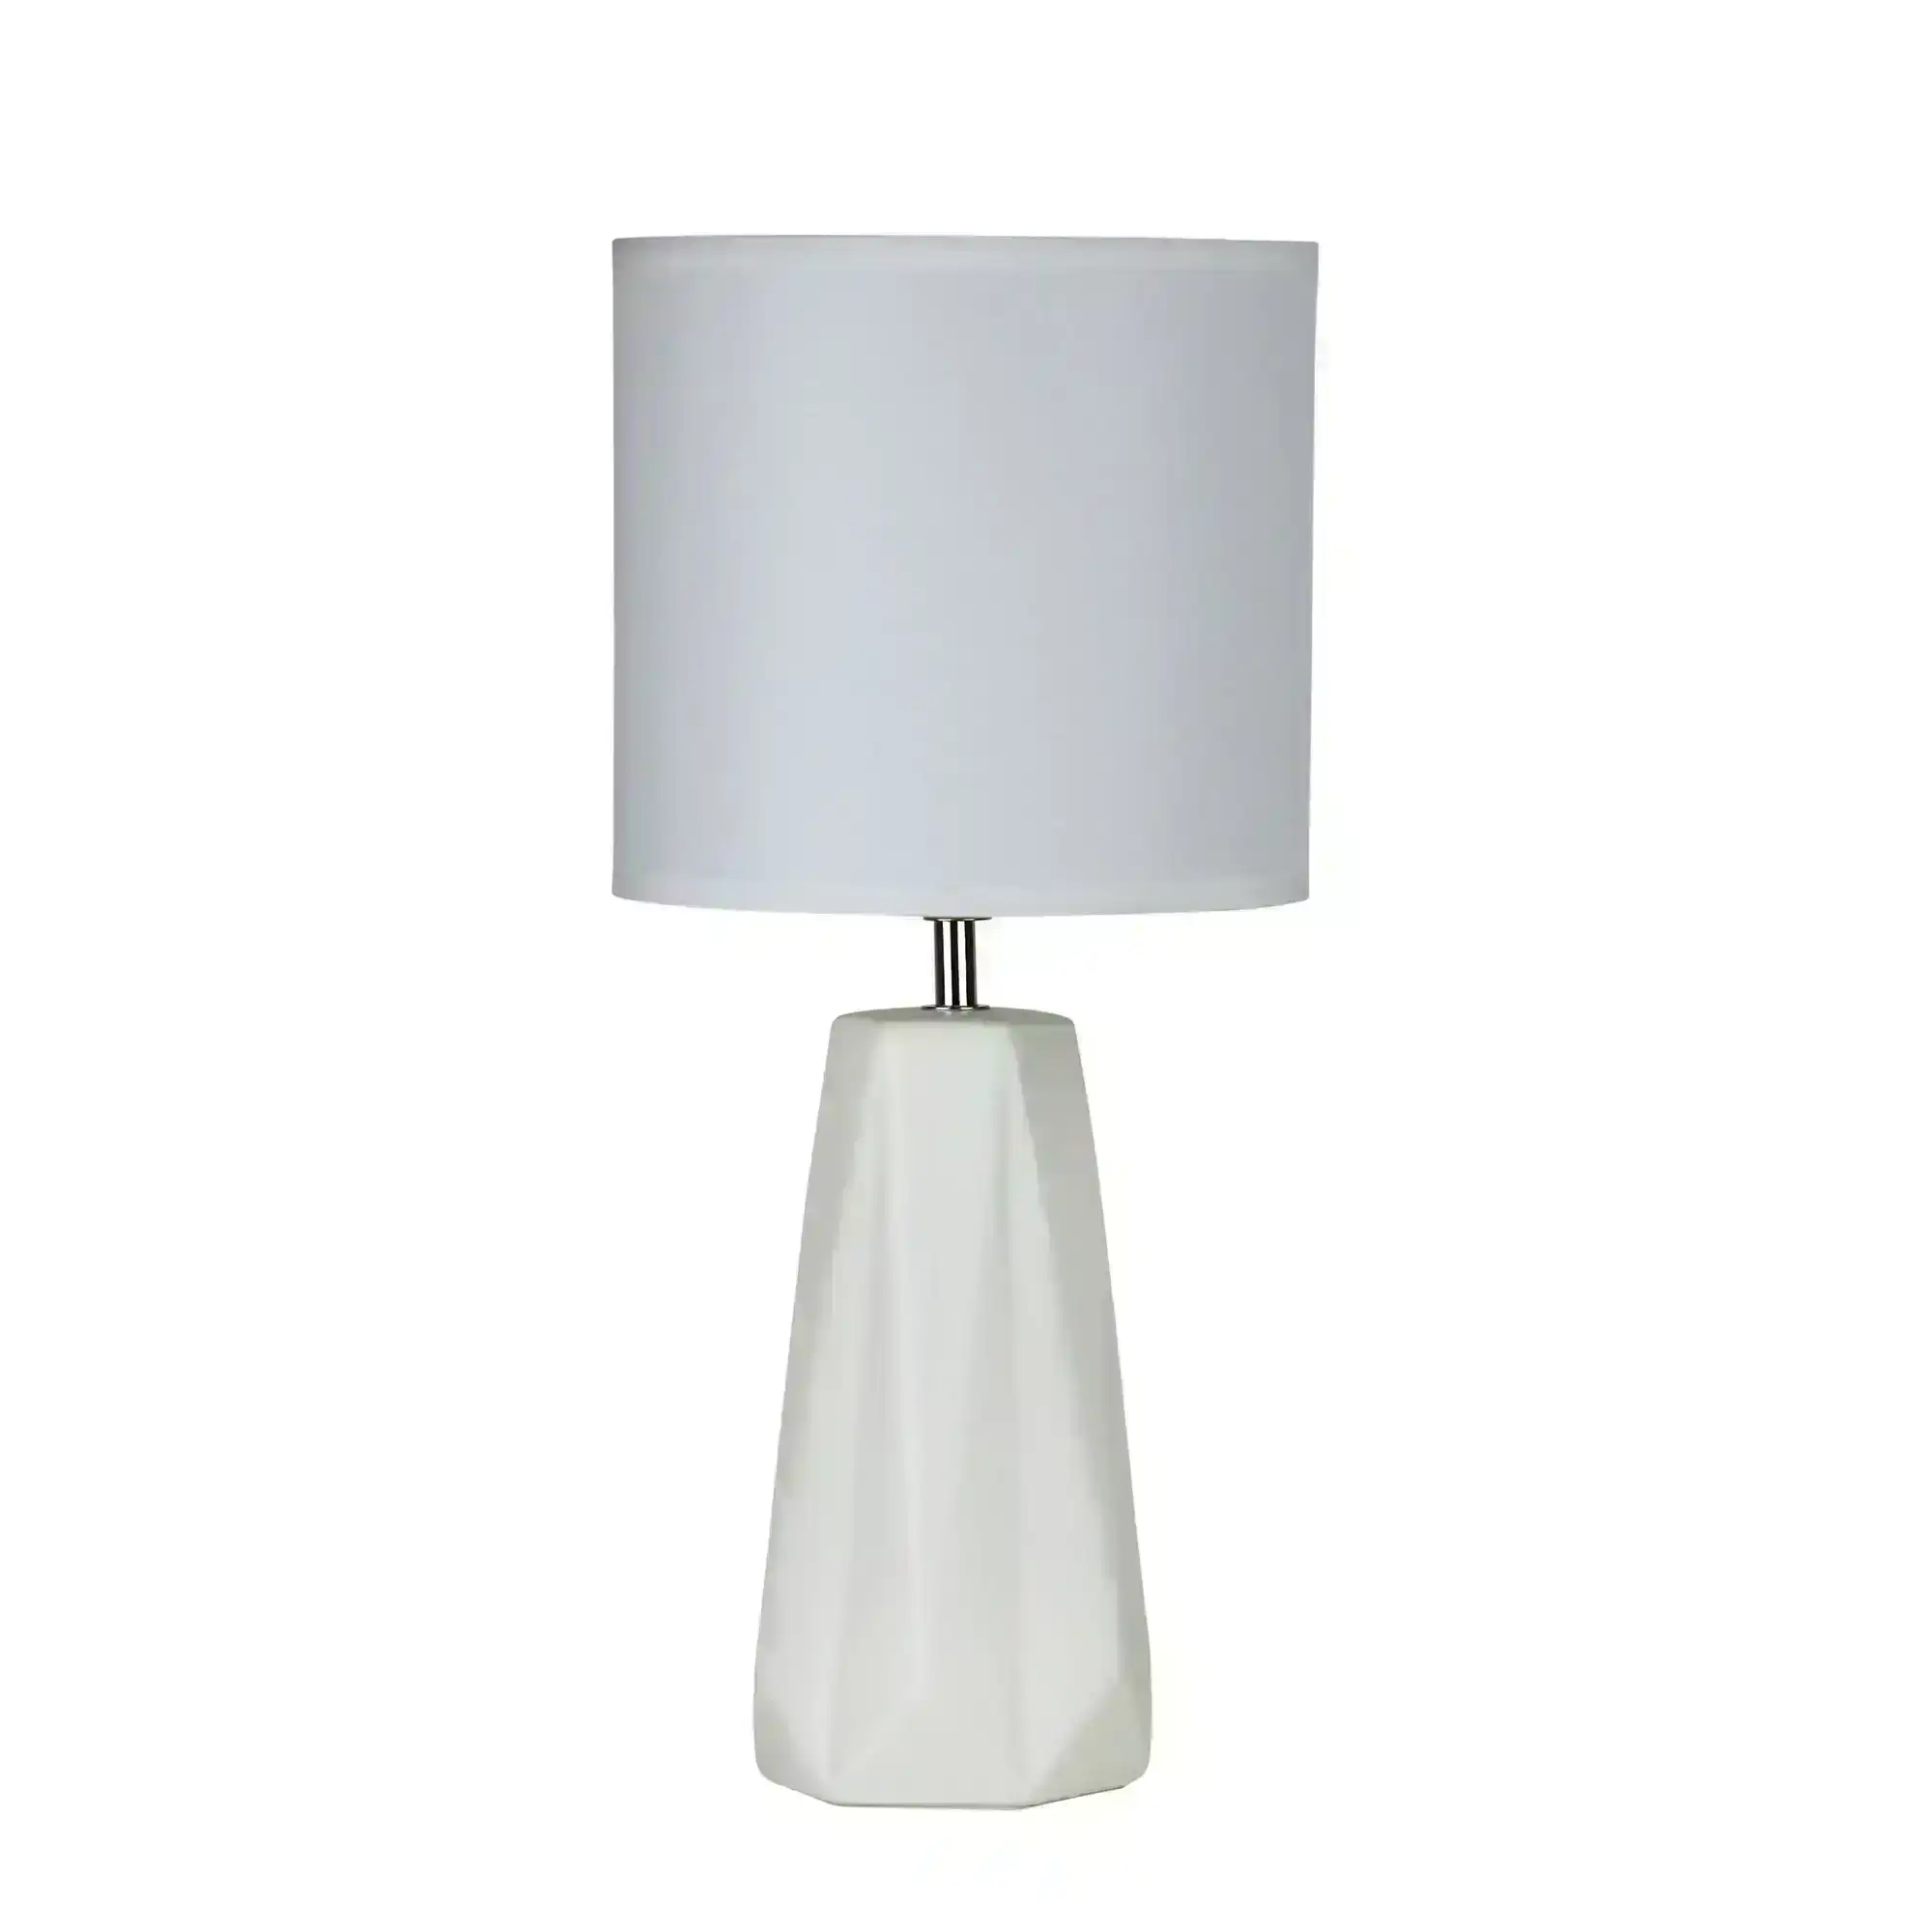 SHELLY White Ceramic Table Lamp